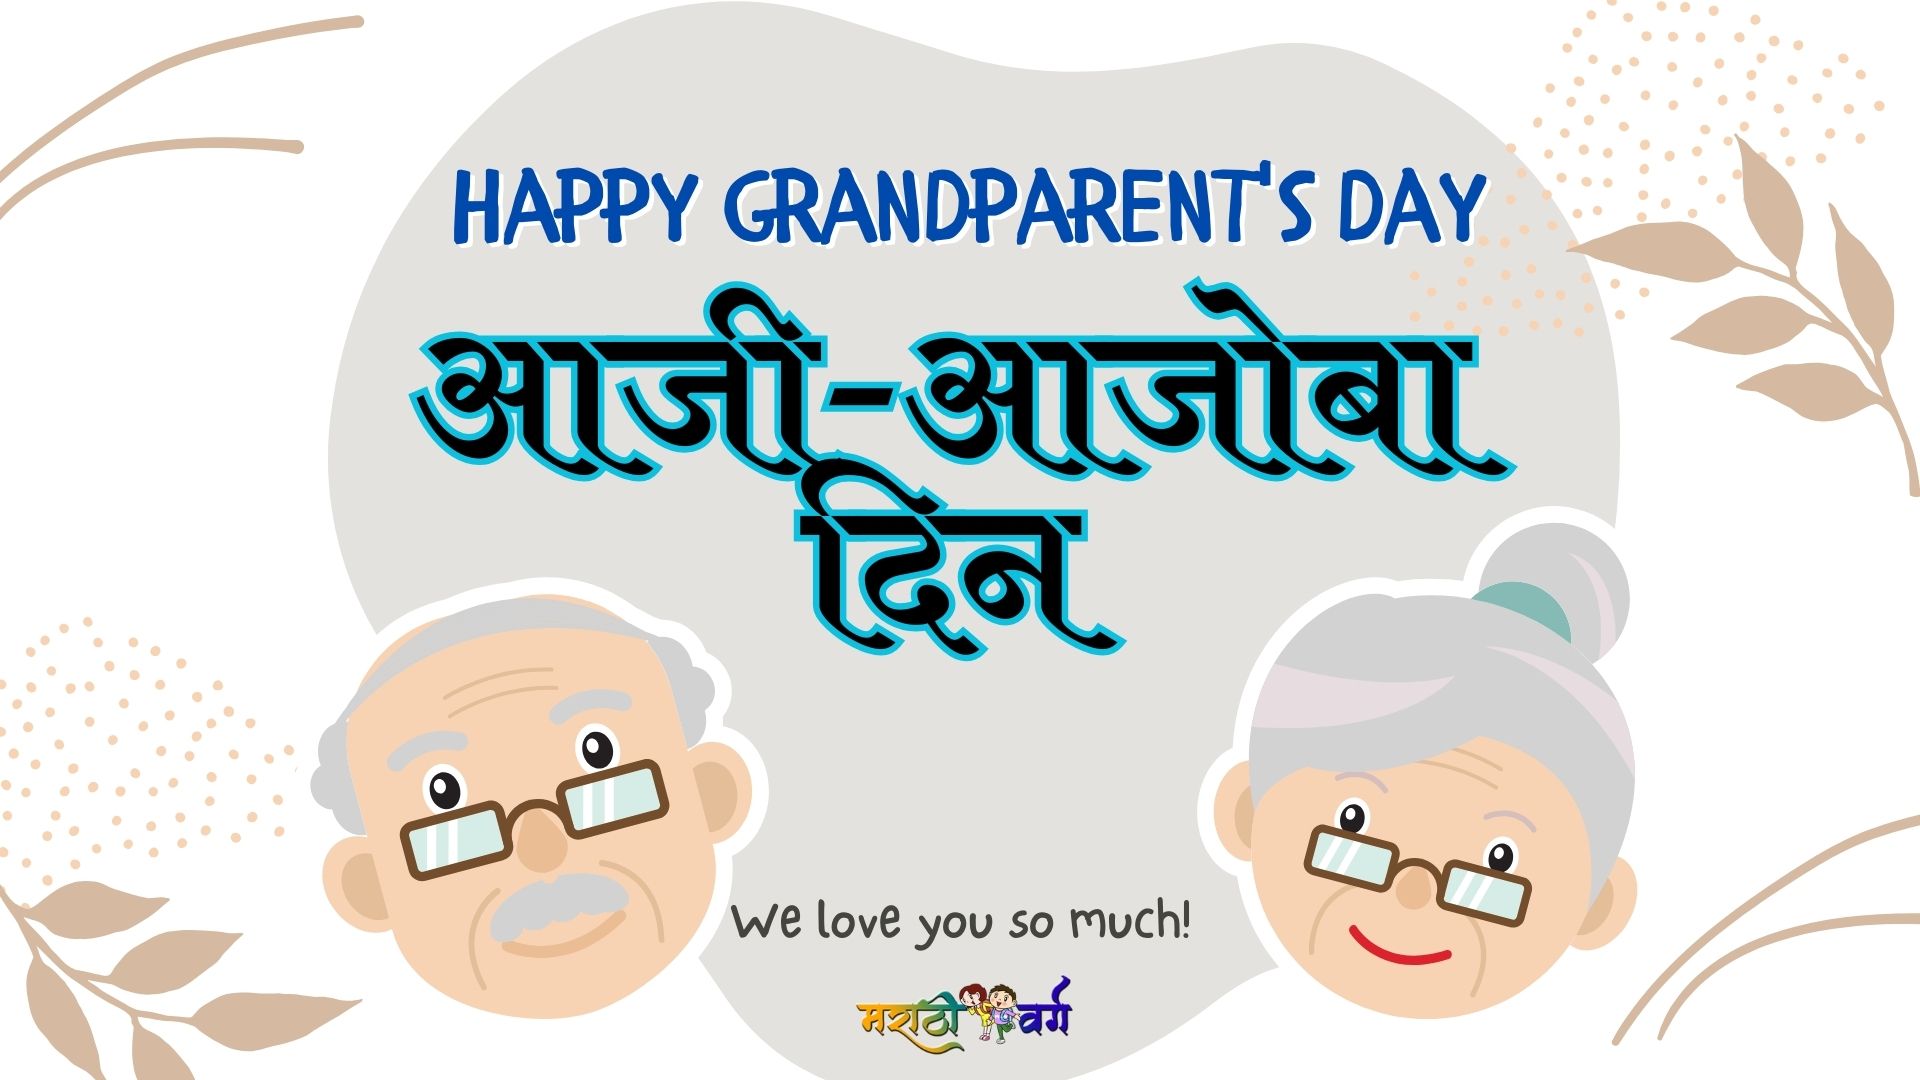 Grandparents' Day: Celebrating the Pillars of Wisdom and Love